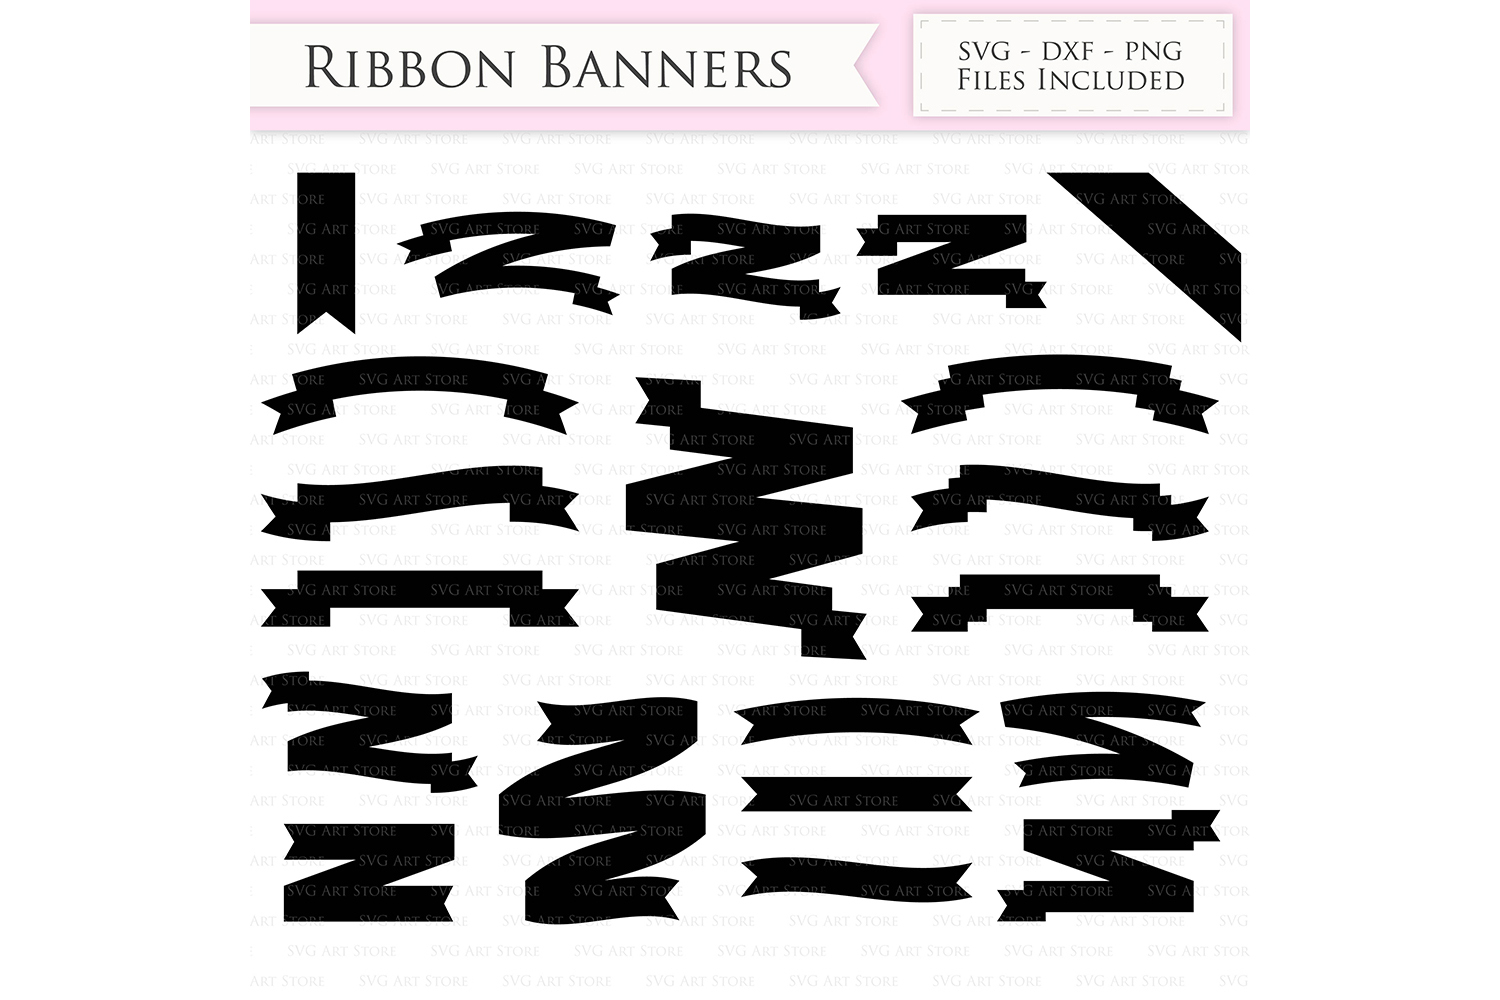 Ribbon Banners SVG text banners svg cutting files Cricut and Silhouette